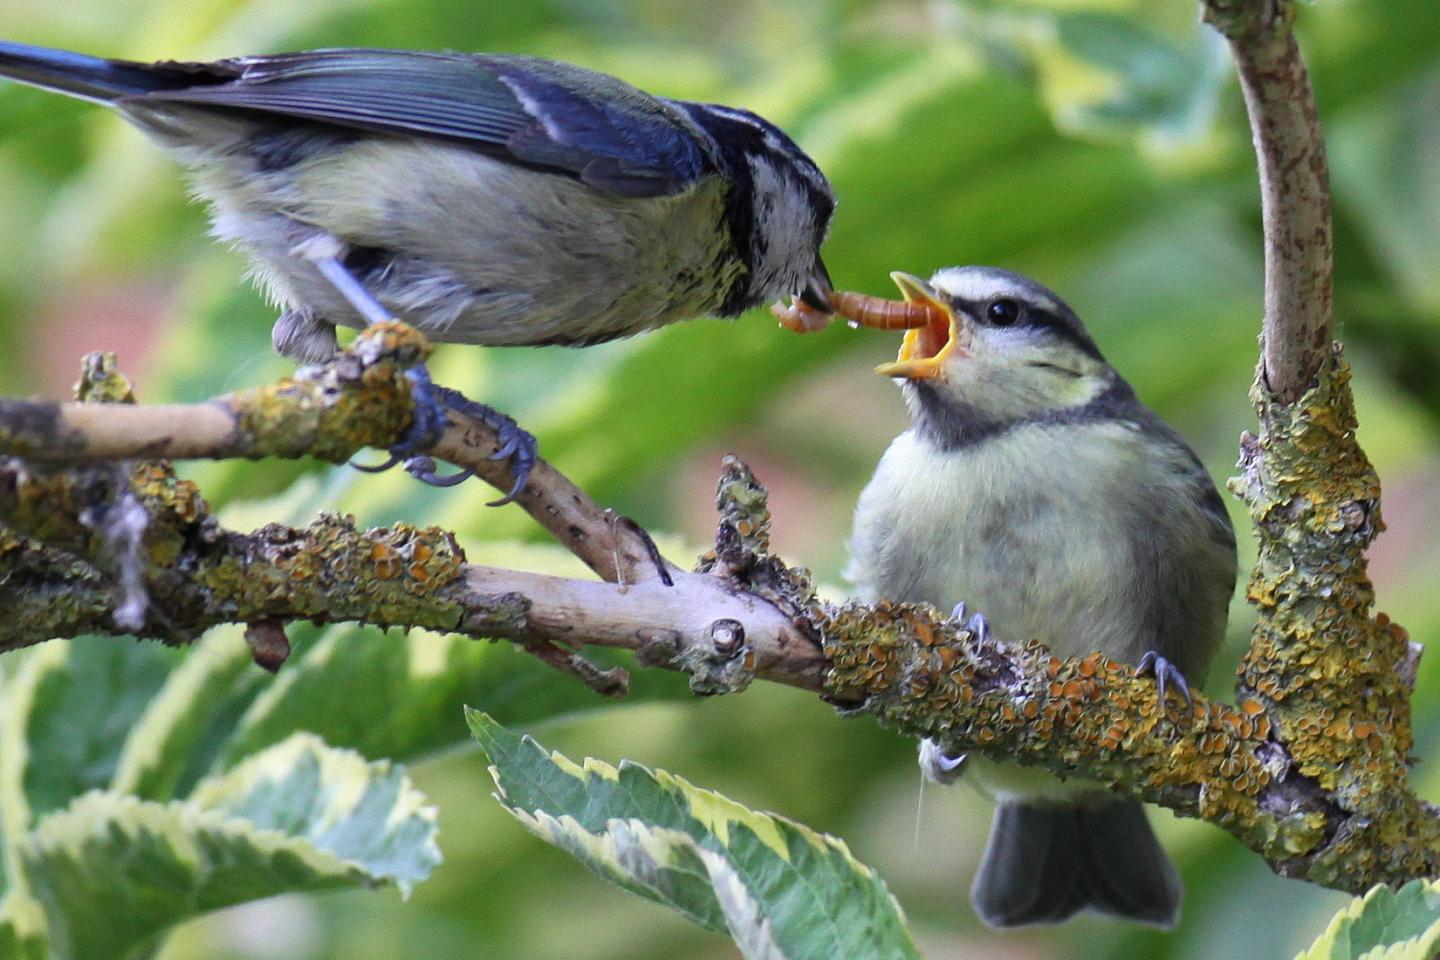 Insectivorous Birds Consume Annually as Much Energy as the City of New York